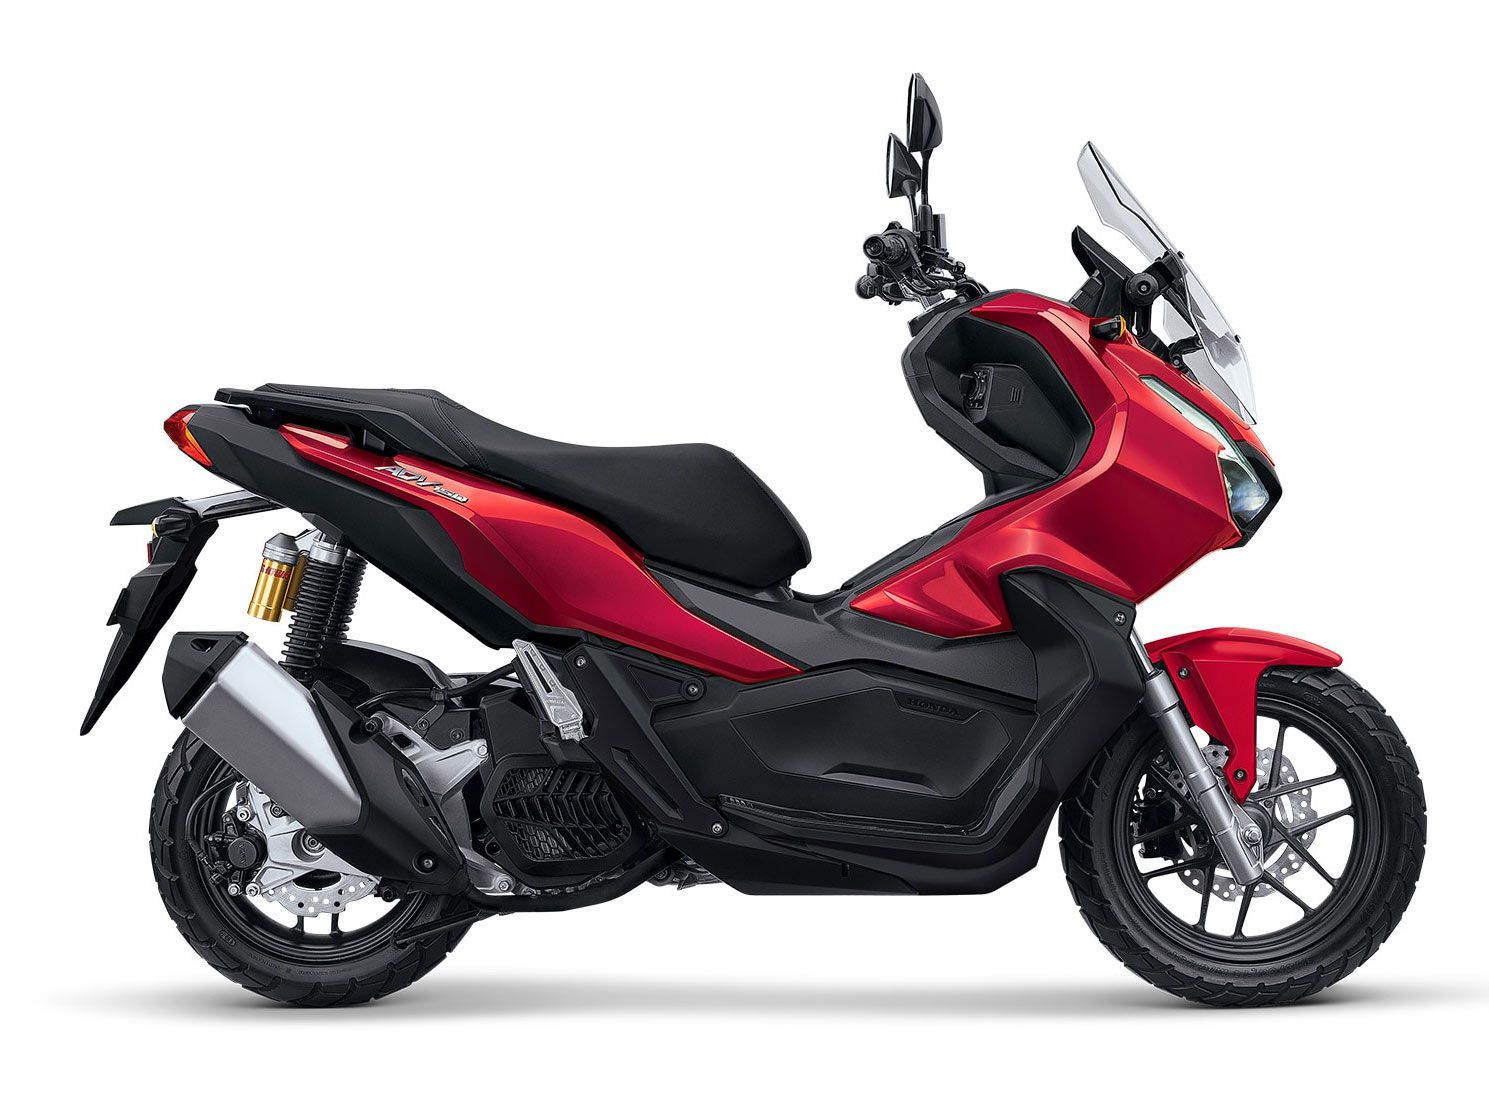 The Honda ADV150: like a Grom but without shifting or hooliganism.